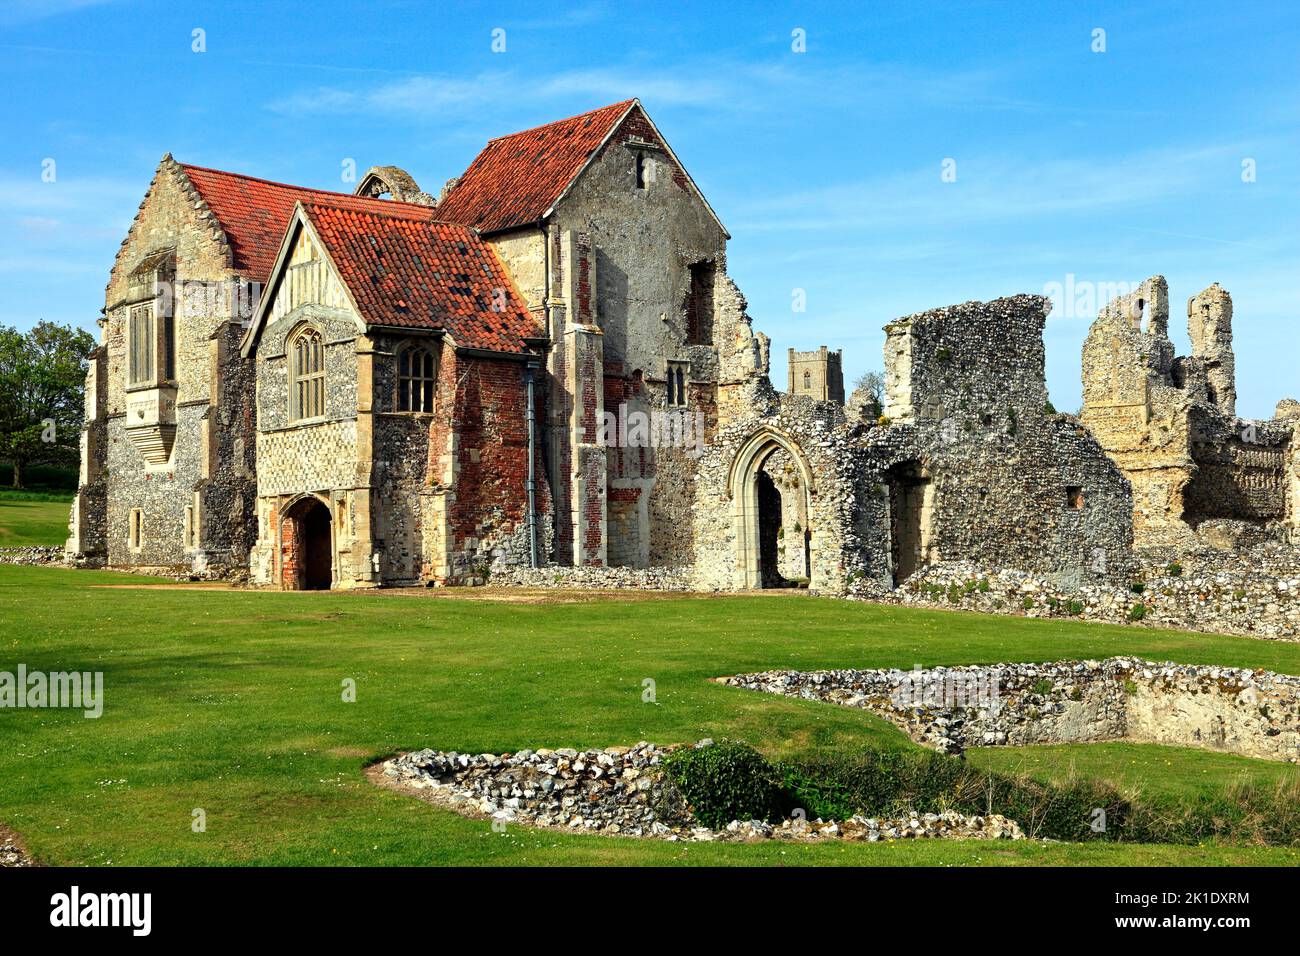 Castle Acre Priory, Prior's Lodging, Cluniac Order, Castle Acre, Norfolk, England, UK Stock Photo